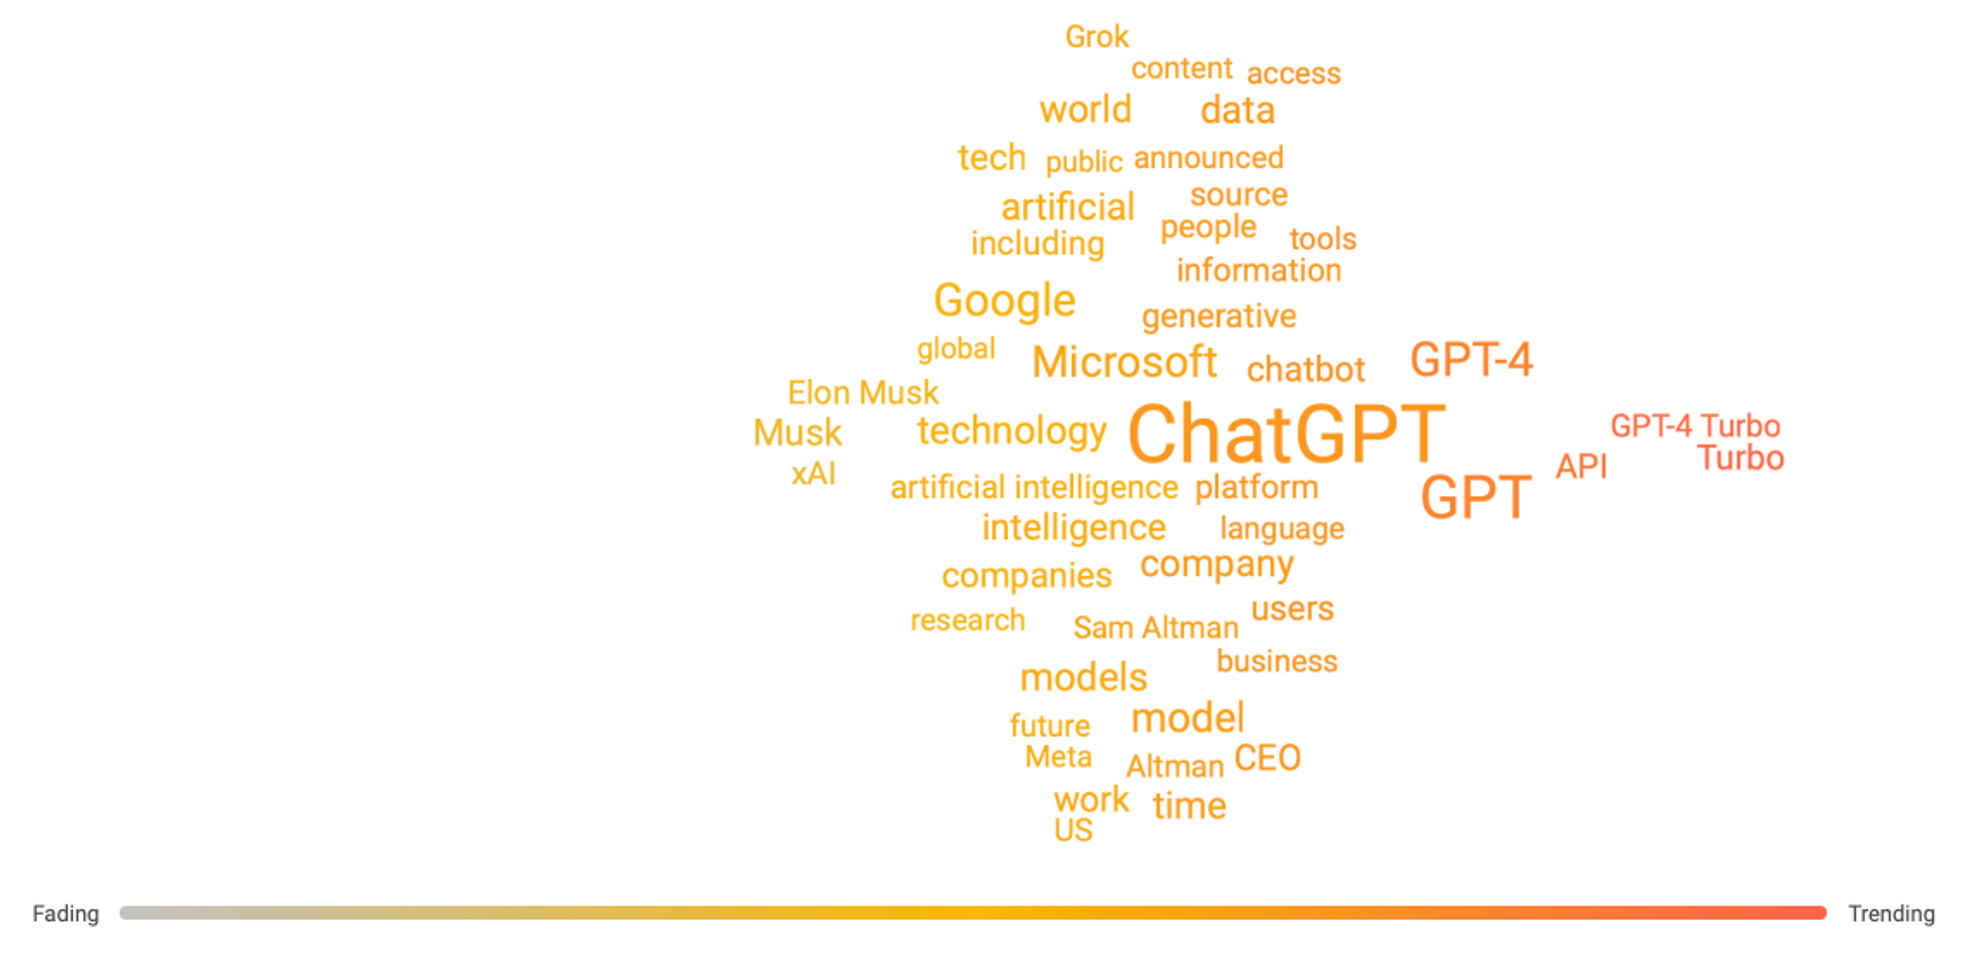 Social media monitoring reveals that GPT-4 Turbo is the hottest topic at the DevDay Developer's Day event